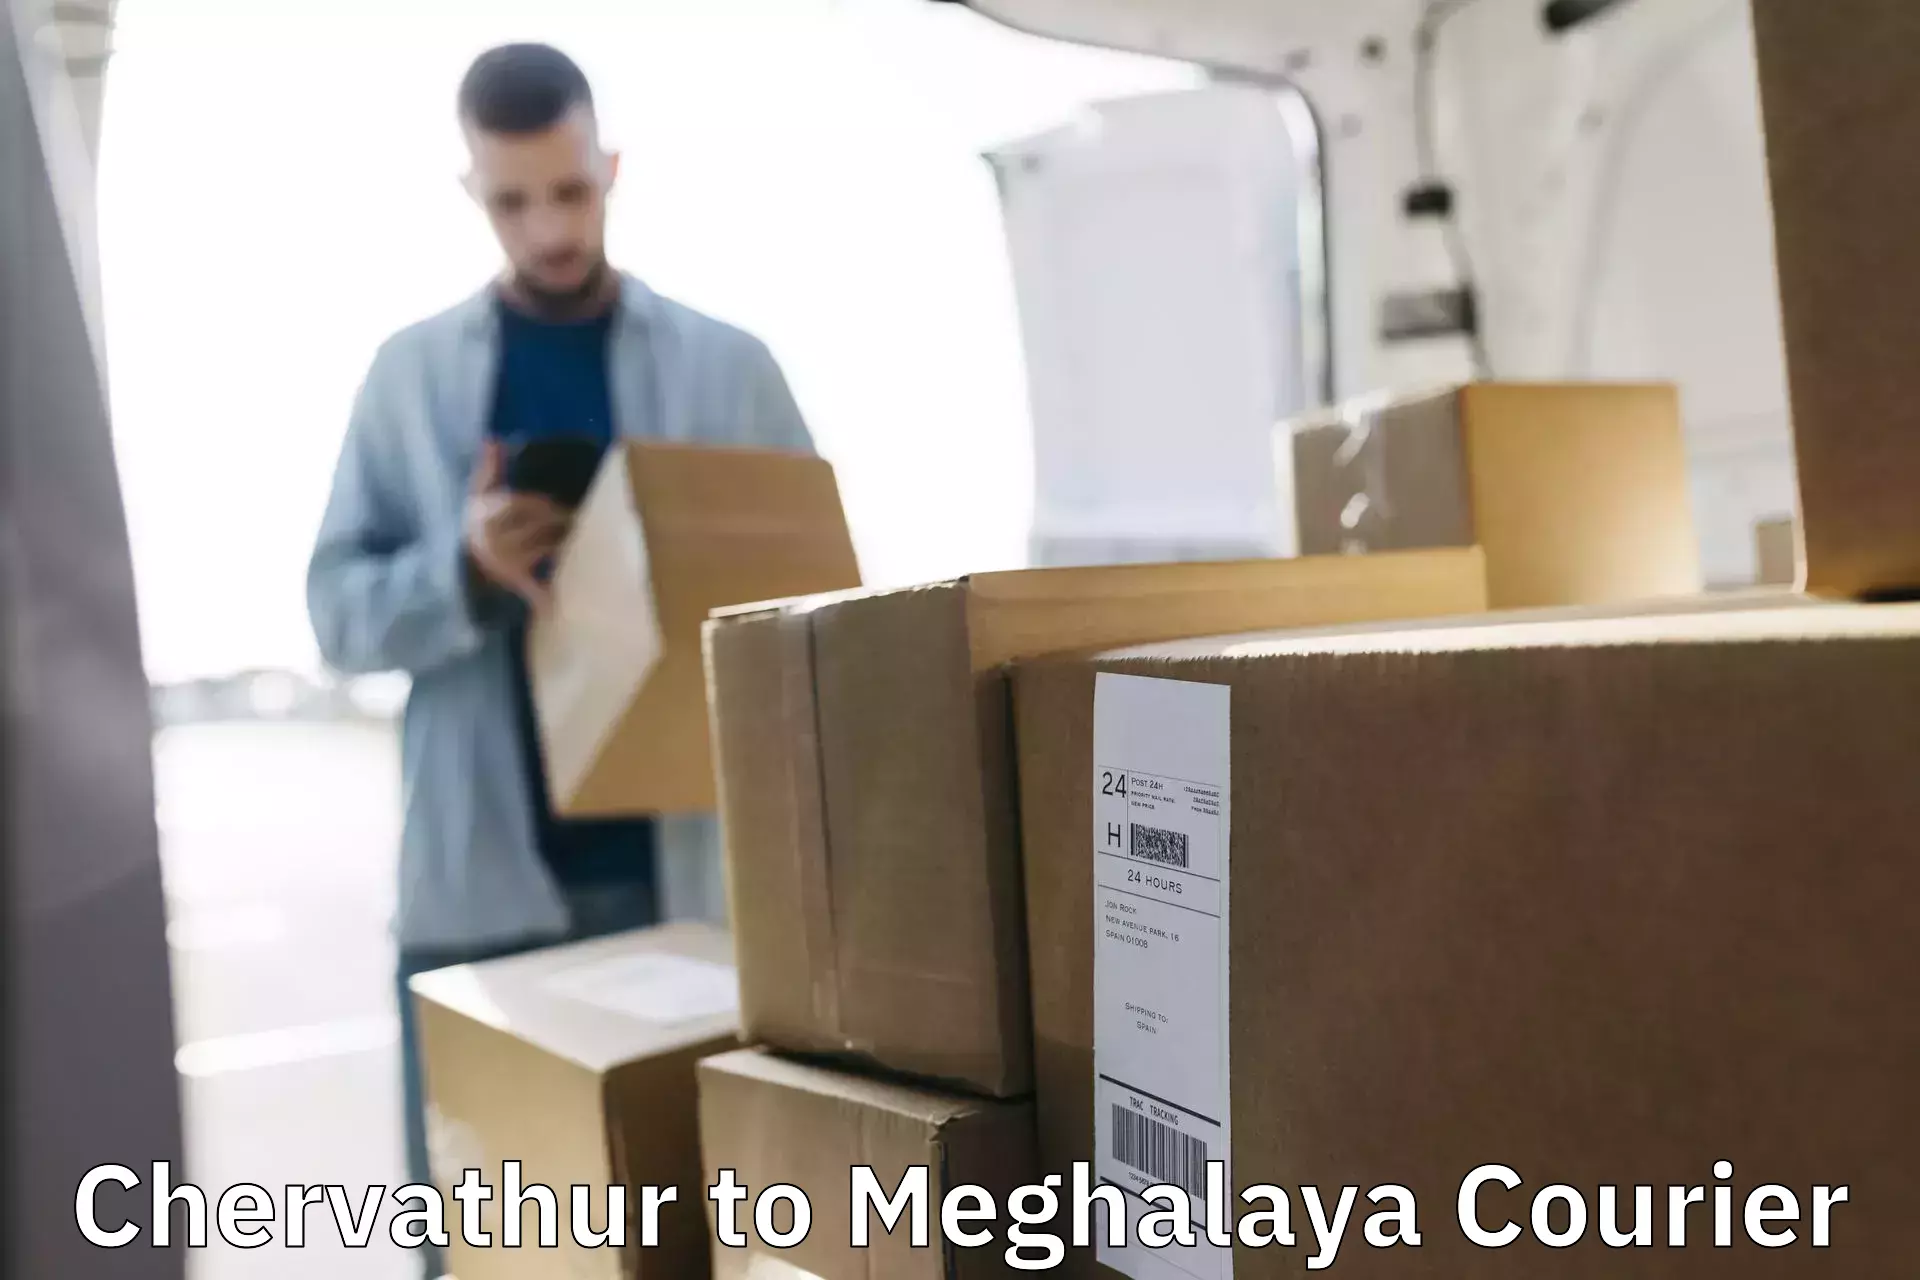 Round-the-clock parcel delivery in Chervathur to Garobadha